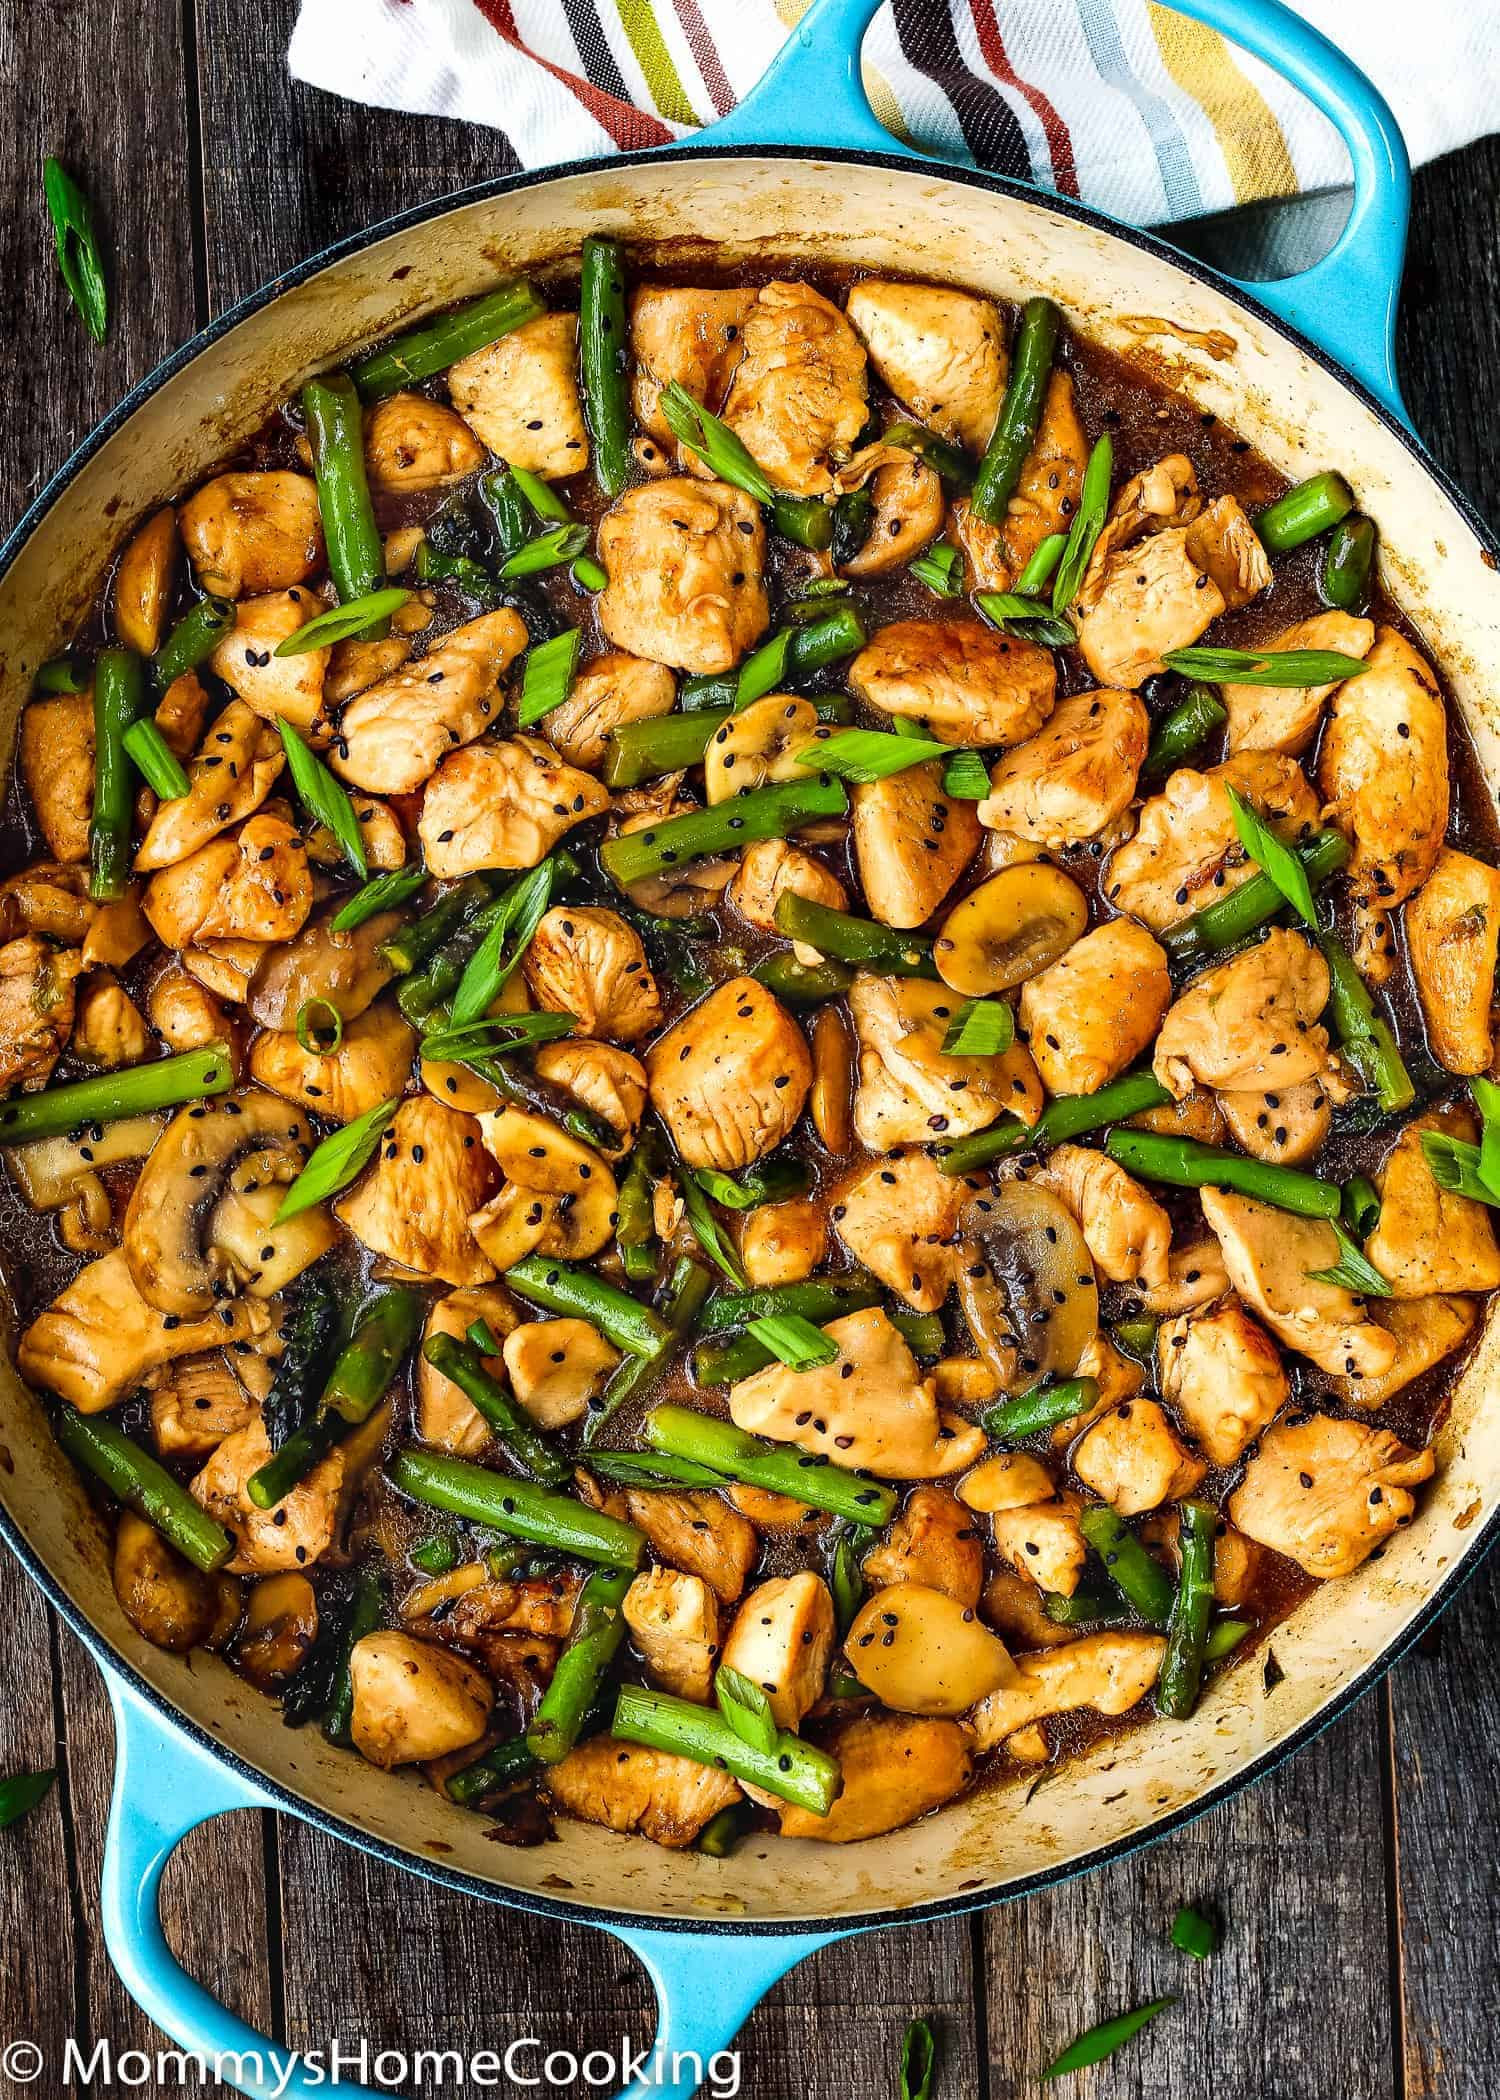 Healthy Easy Dinner Recipes Beautiful Easy Healthy Chicken and asparagus Skillet Mommy S Home